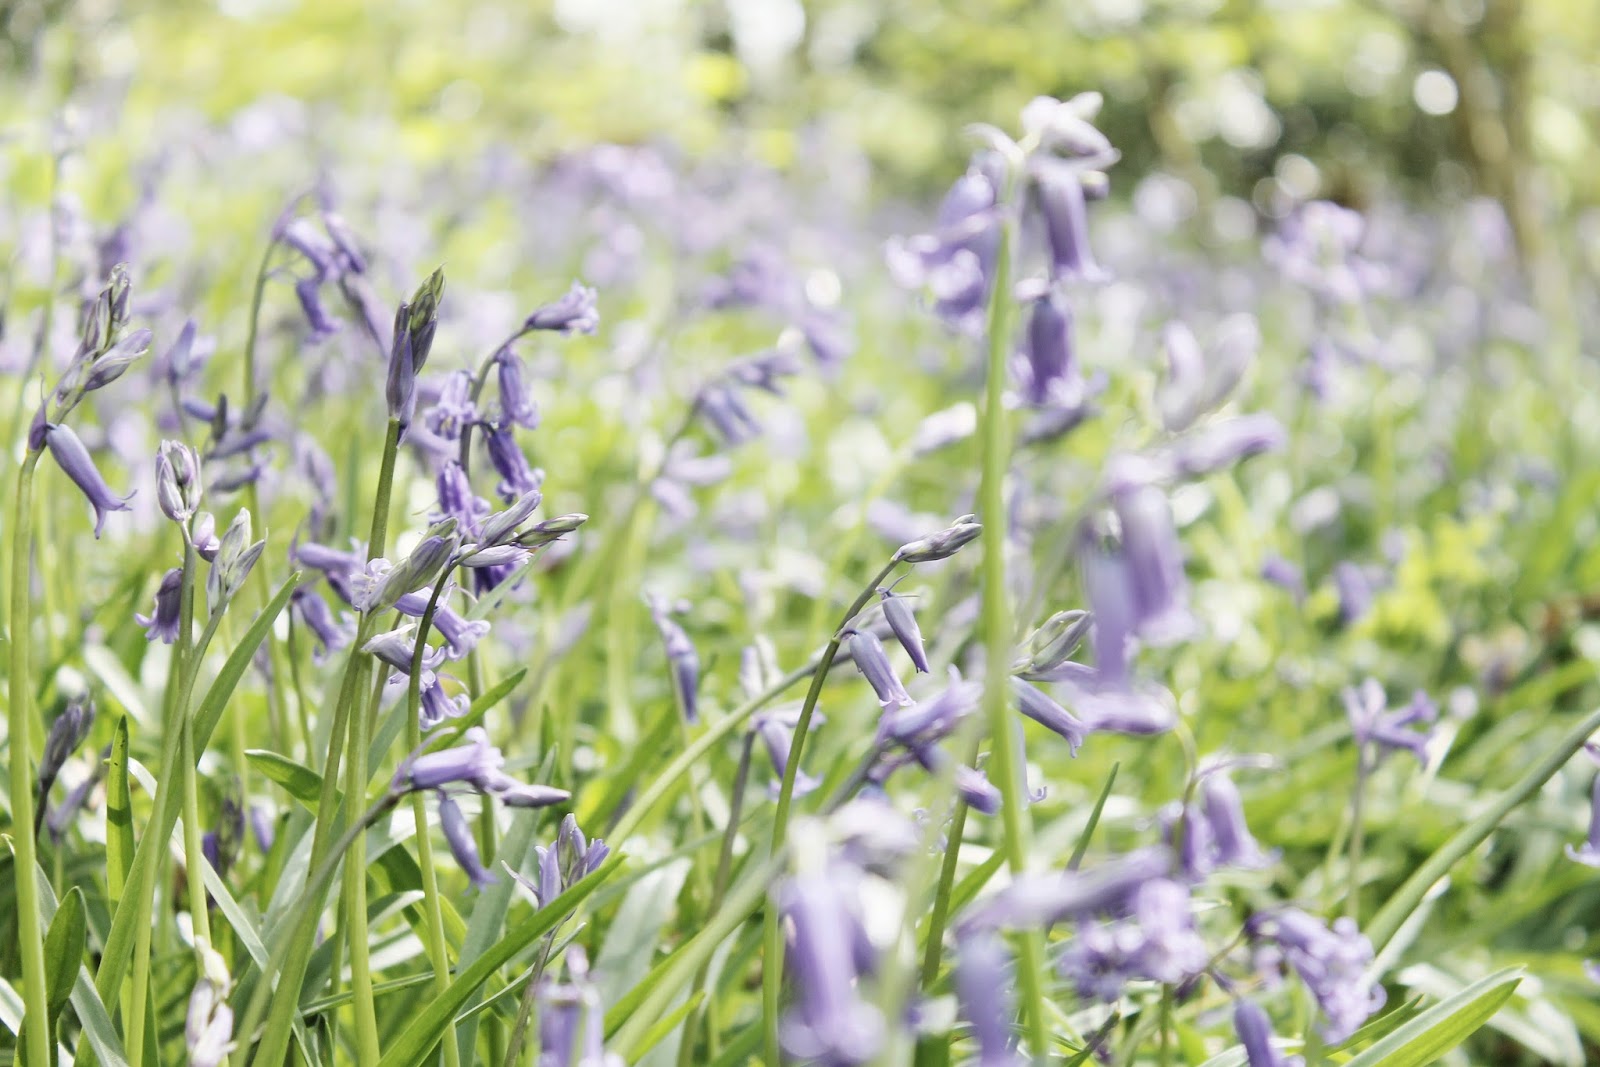 Where to find bluebells, the best places for bluebells in the UK